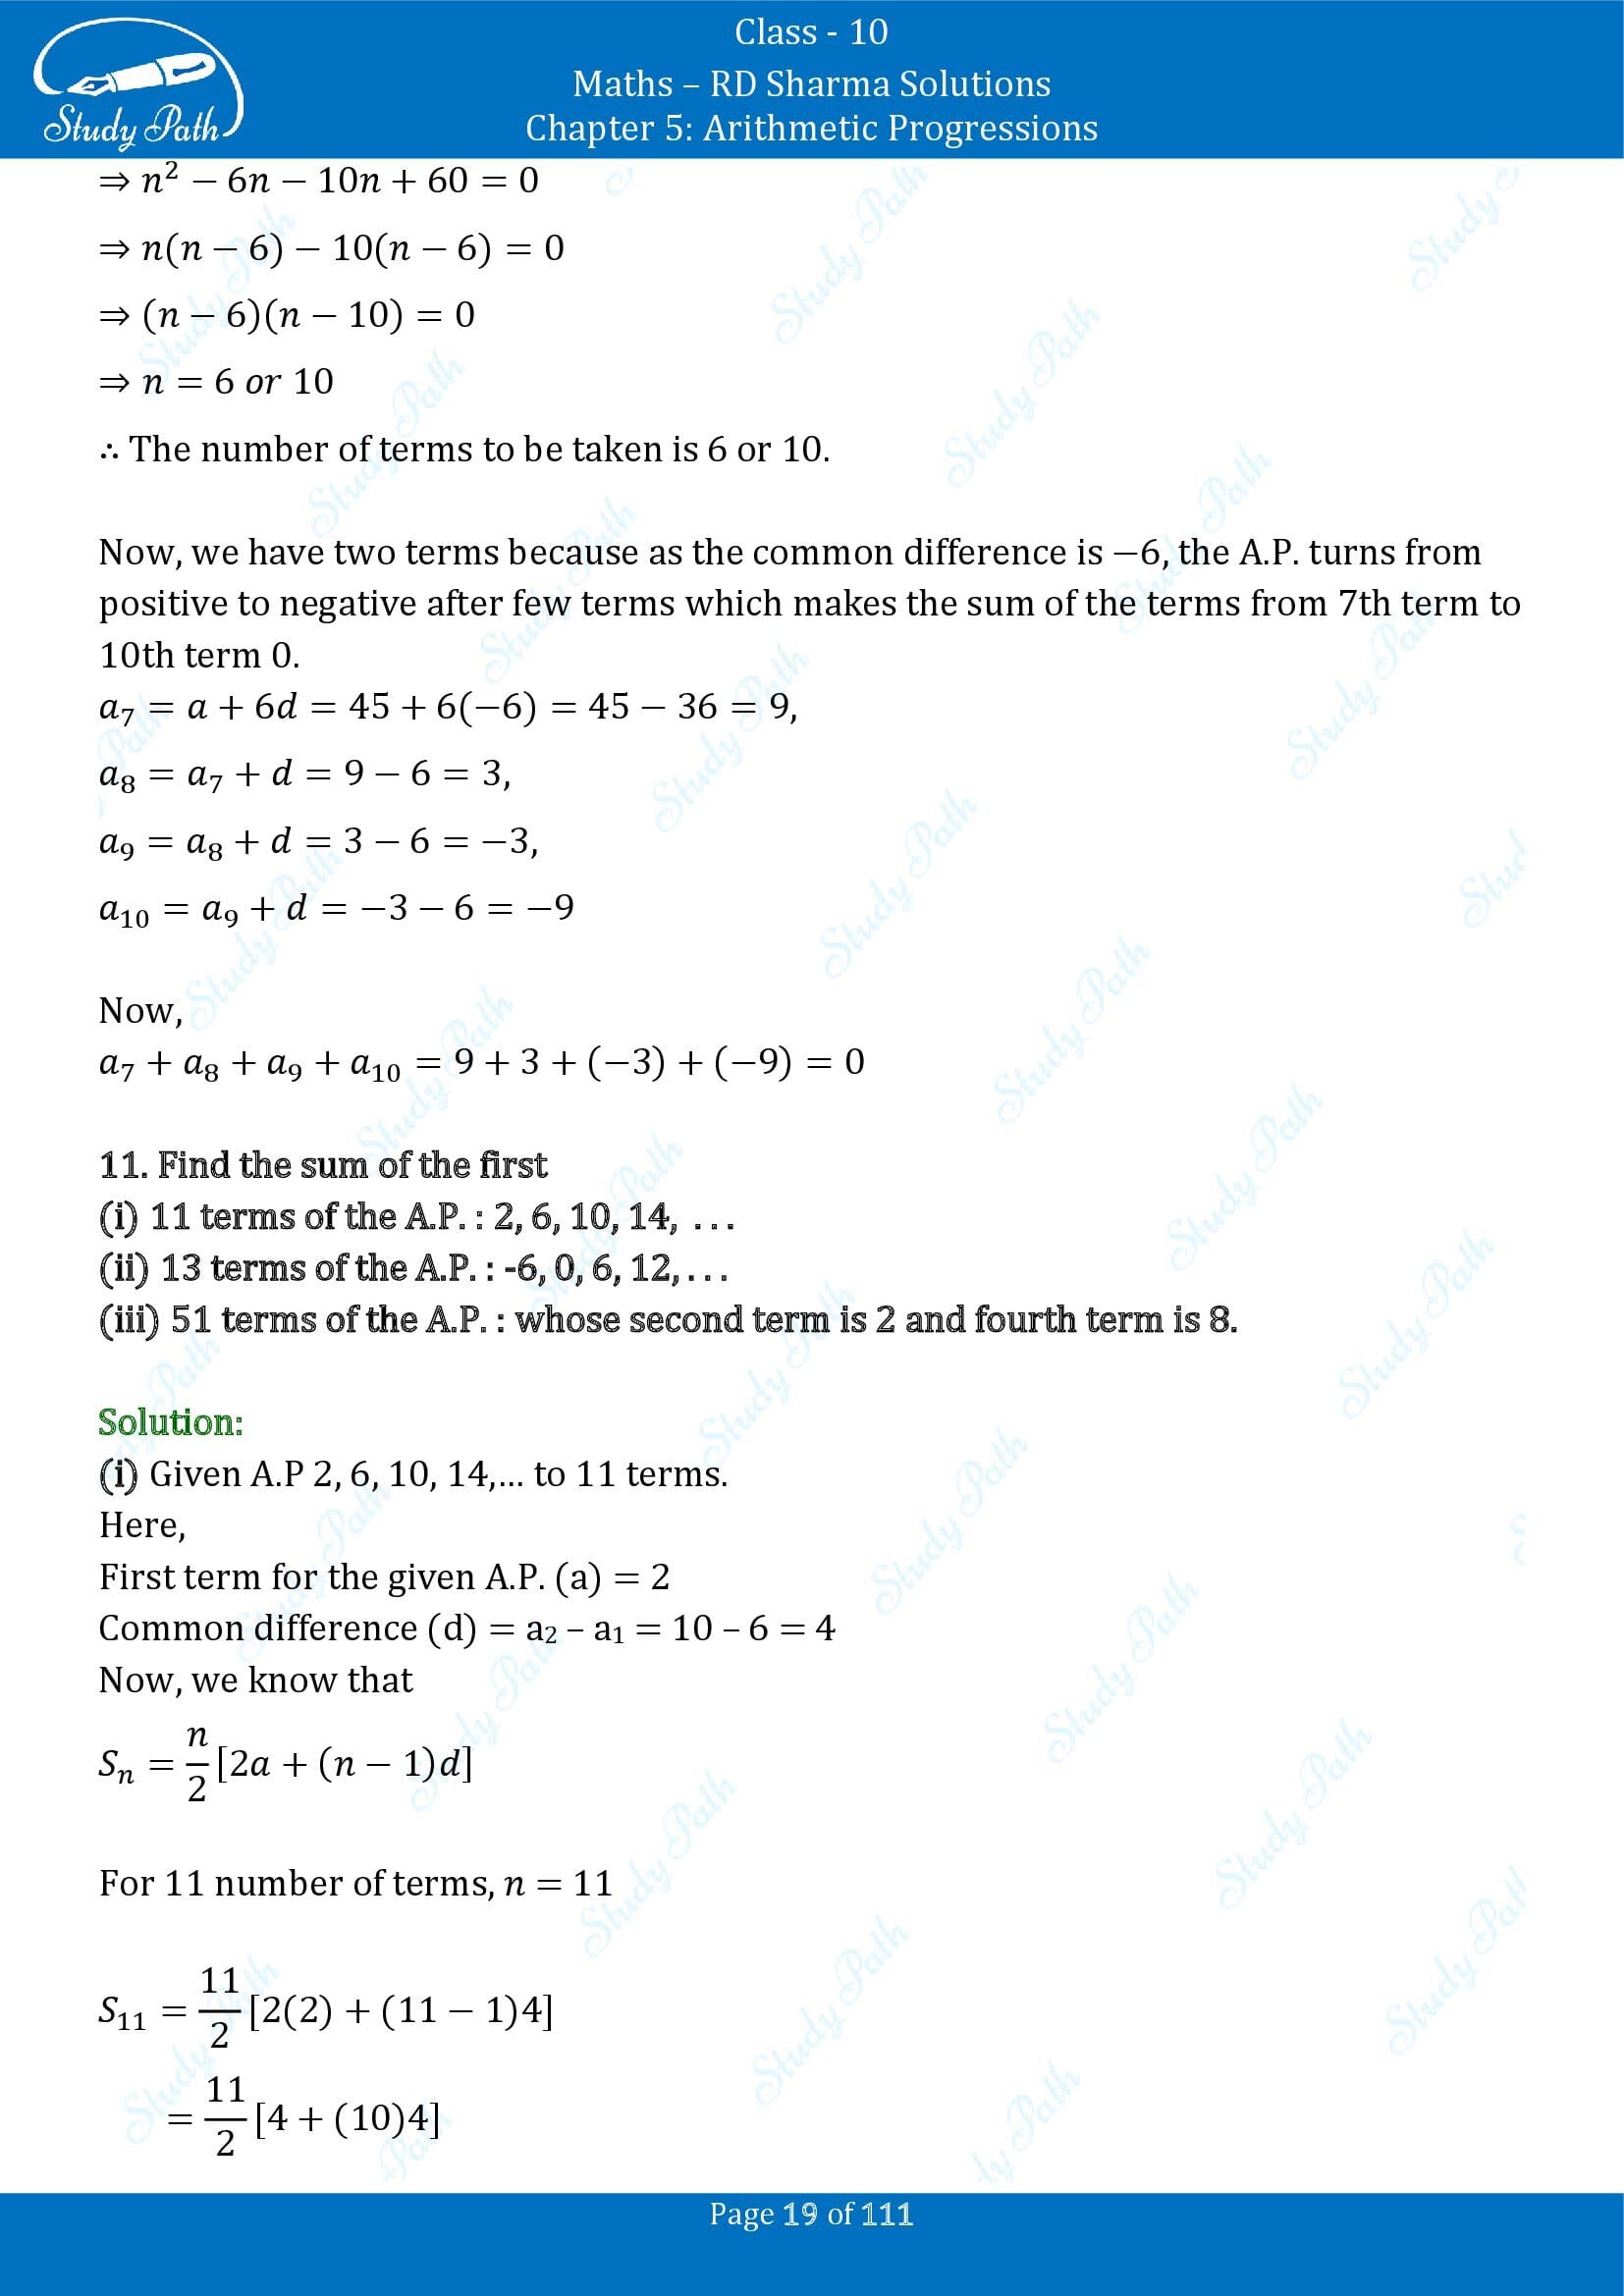 RD Sharma Solutions Class 10 Chapter 5 Arithmetic Progressions Exercise 5.6 00019